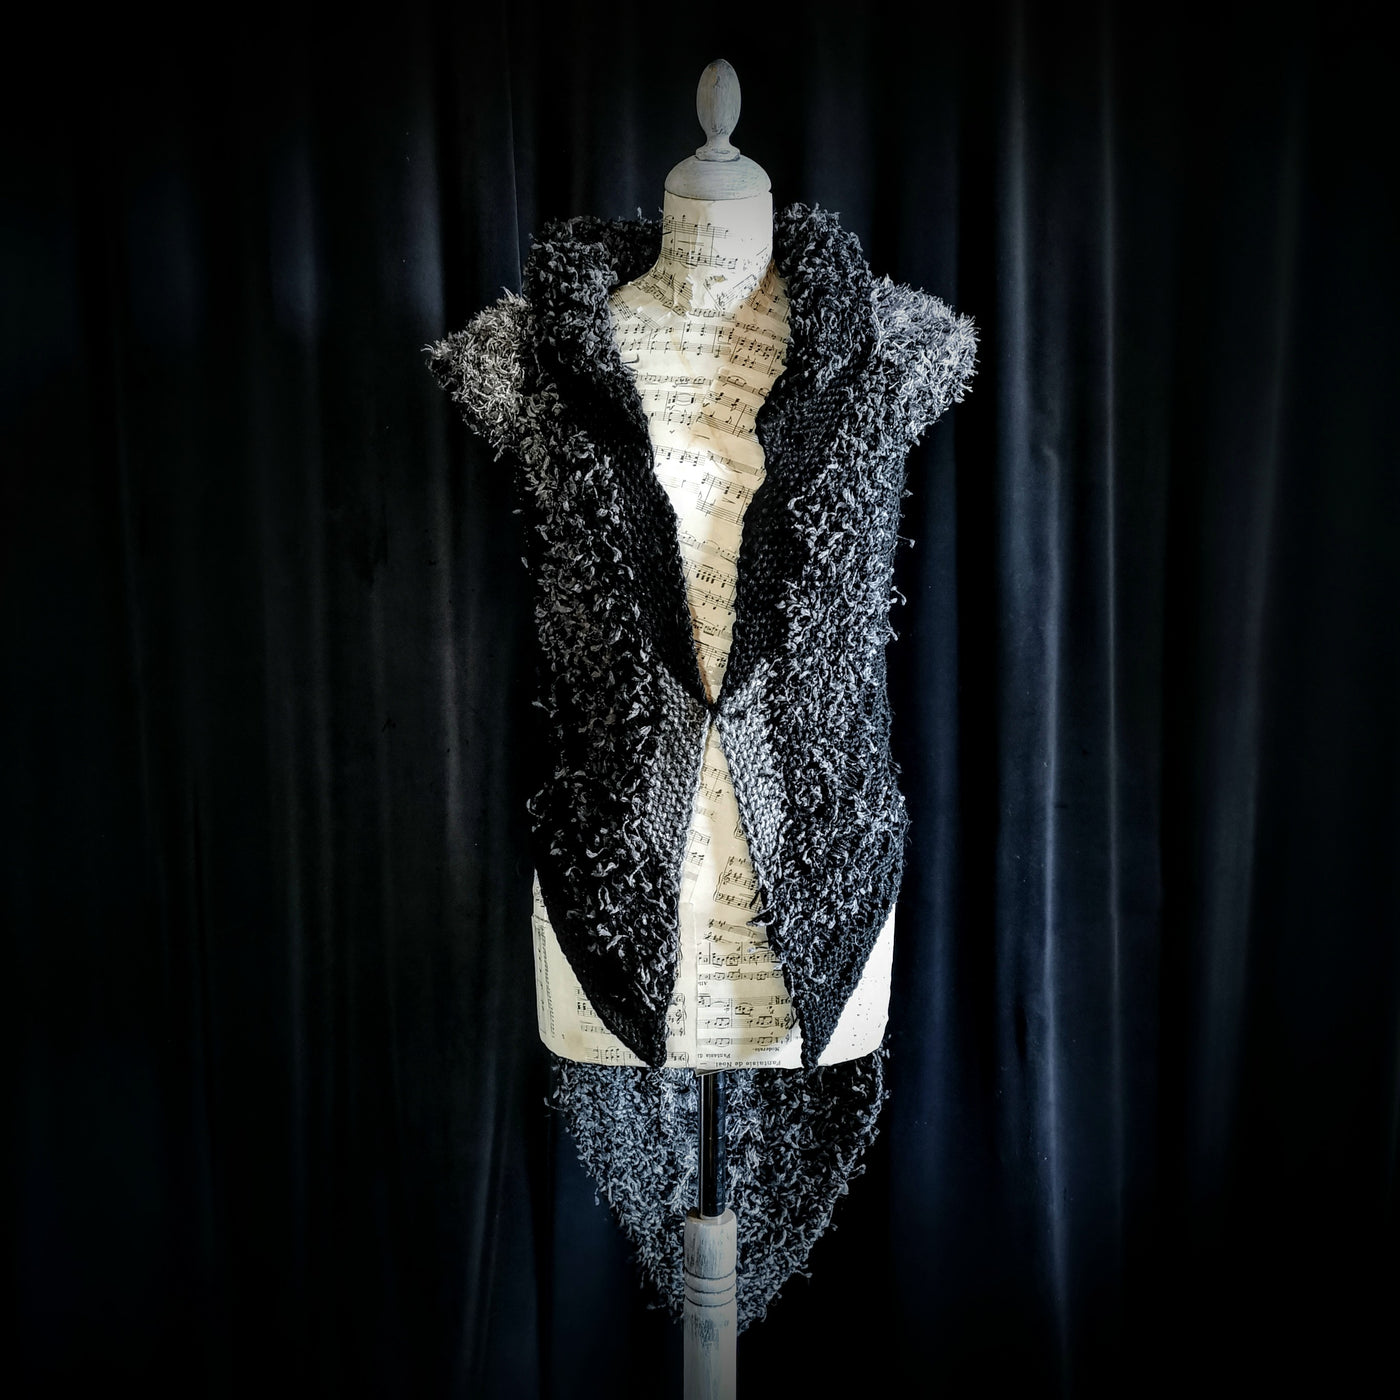 Handmade knitted black and grey hooded vest